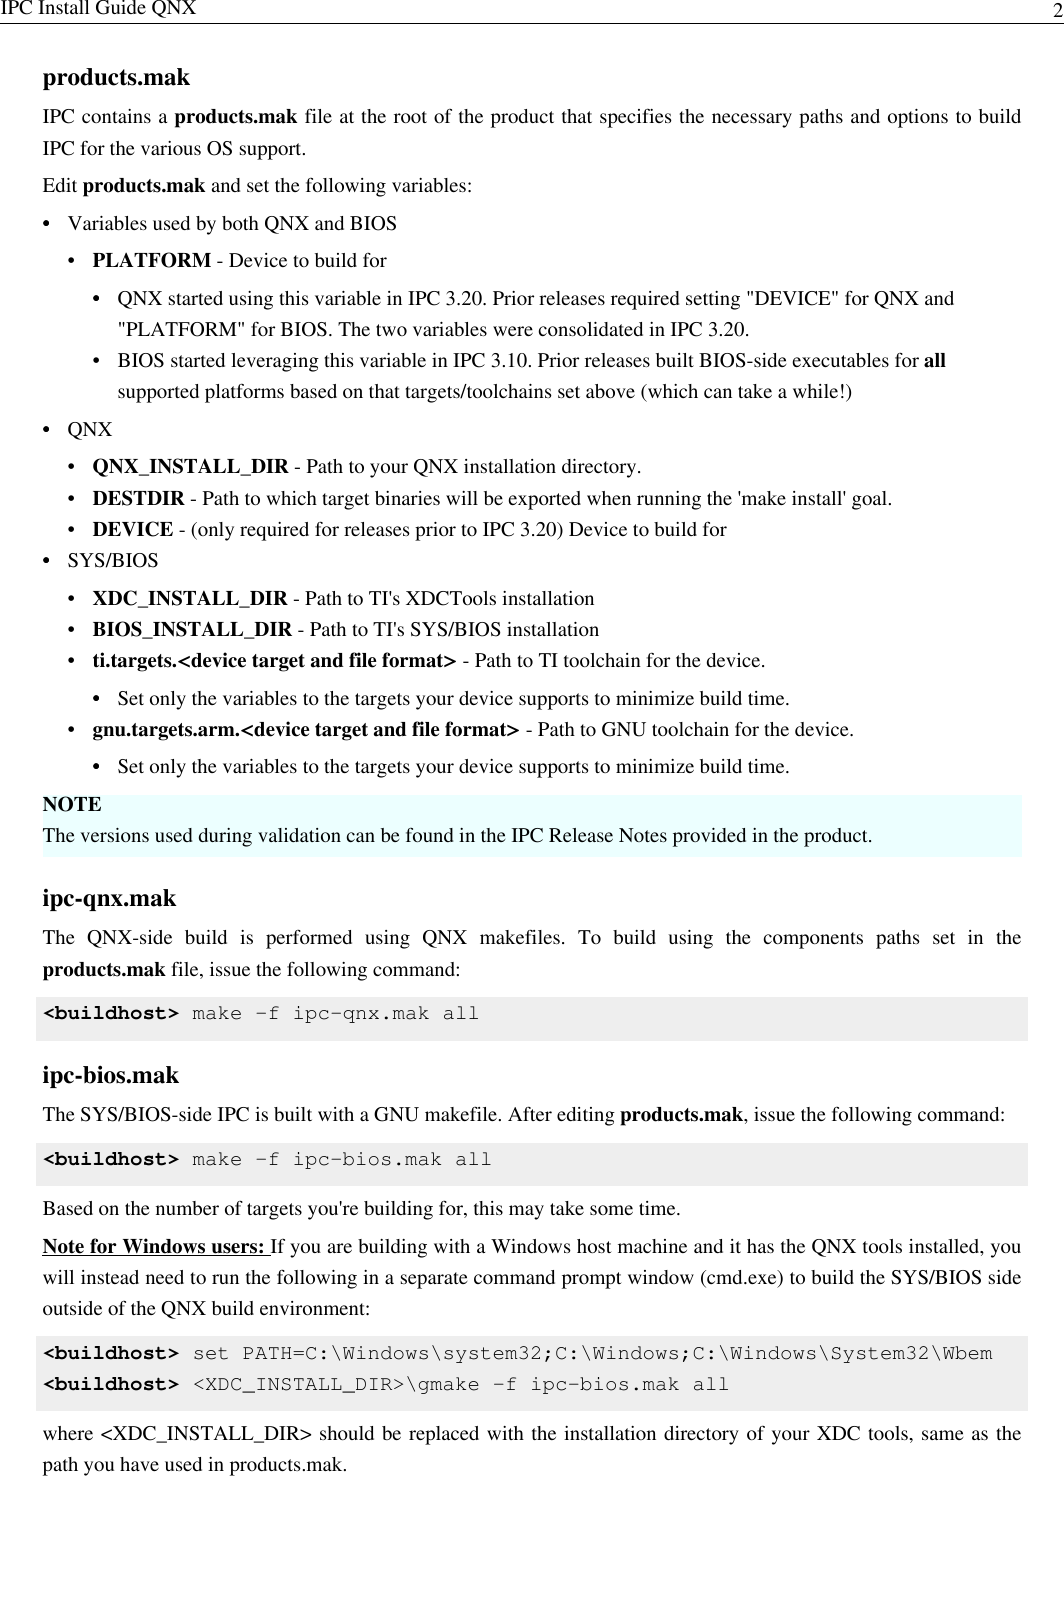 Page 2 of 11 - (anonymous) IPC Install Guide QNX